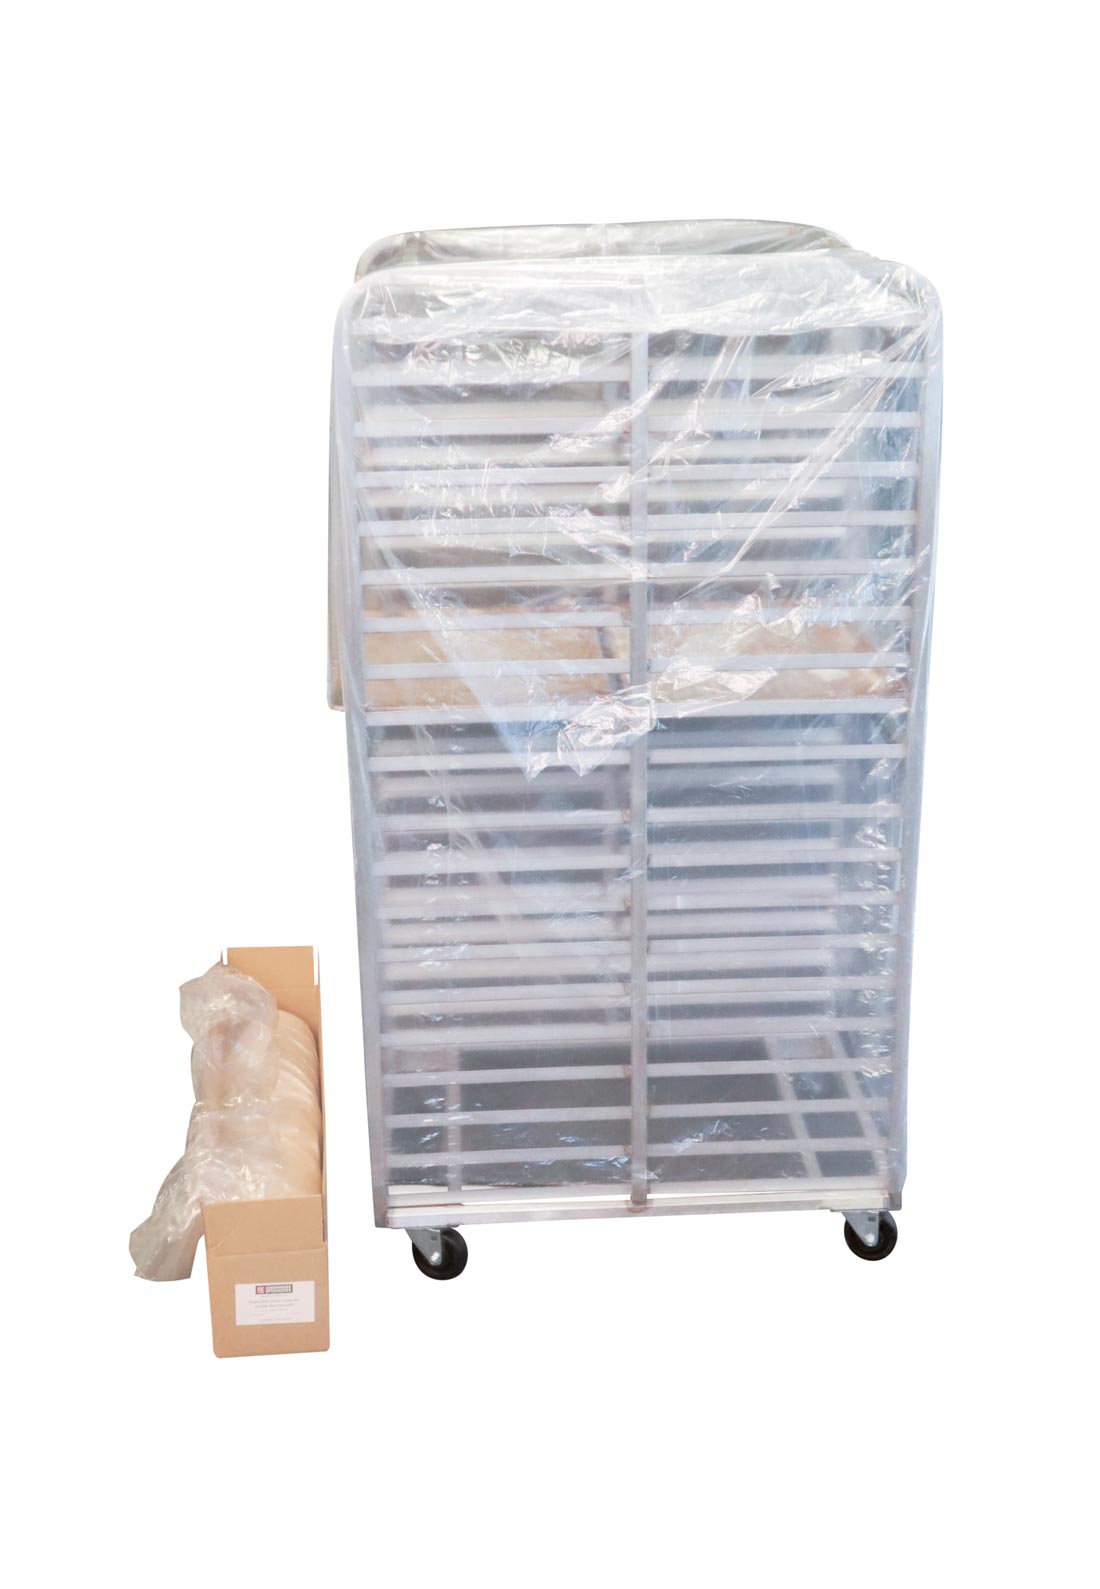 https://schaumburgspecialties.com/wp-content/uploads/nc/s-lmw6pczto3/product_images/q/671/Disposable-double-rack-cover__63074.jpg